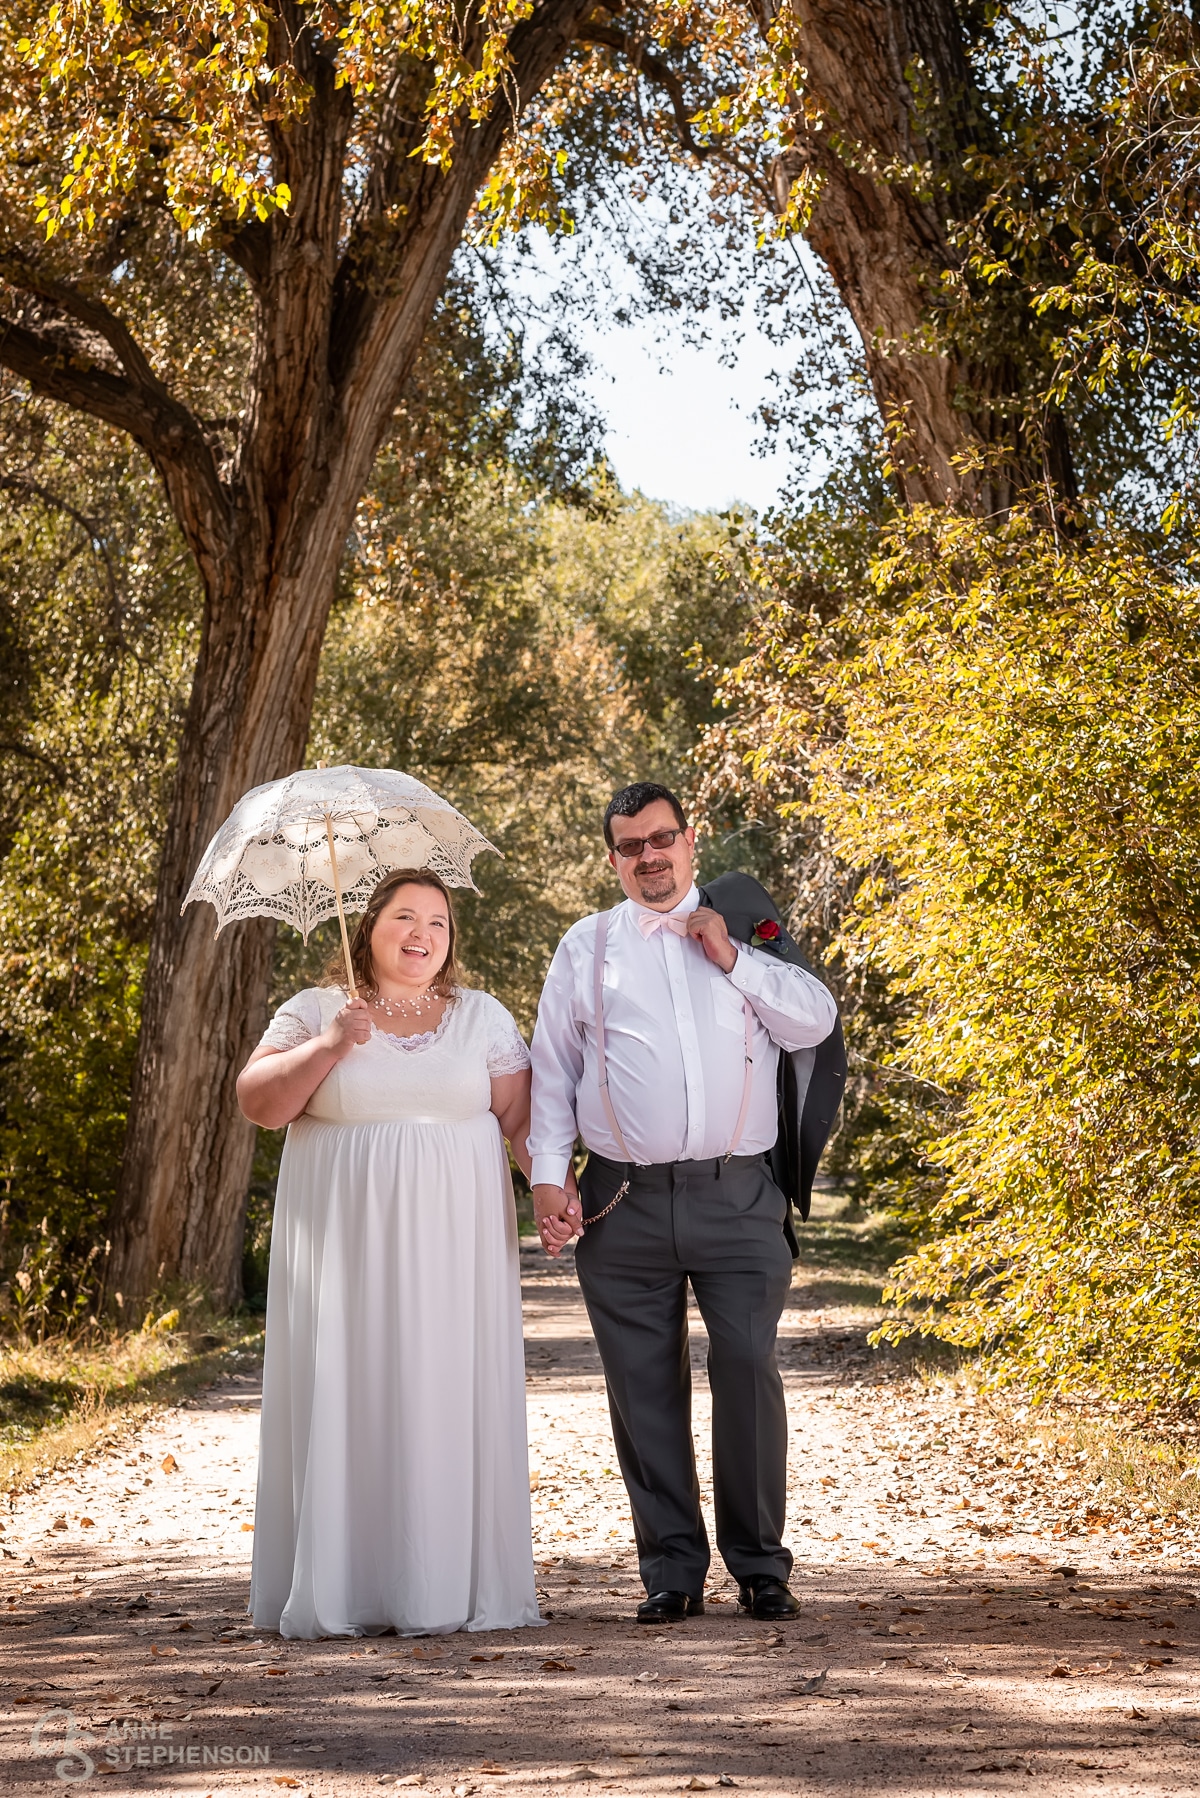 The bride and groom take a stroll under the golden leaves arching over the road next to Boyko Barn.